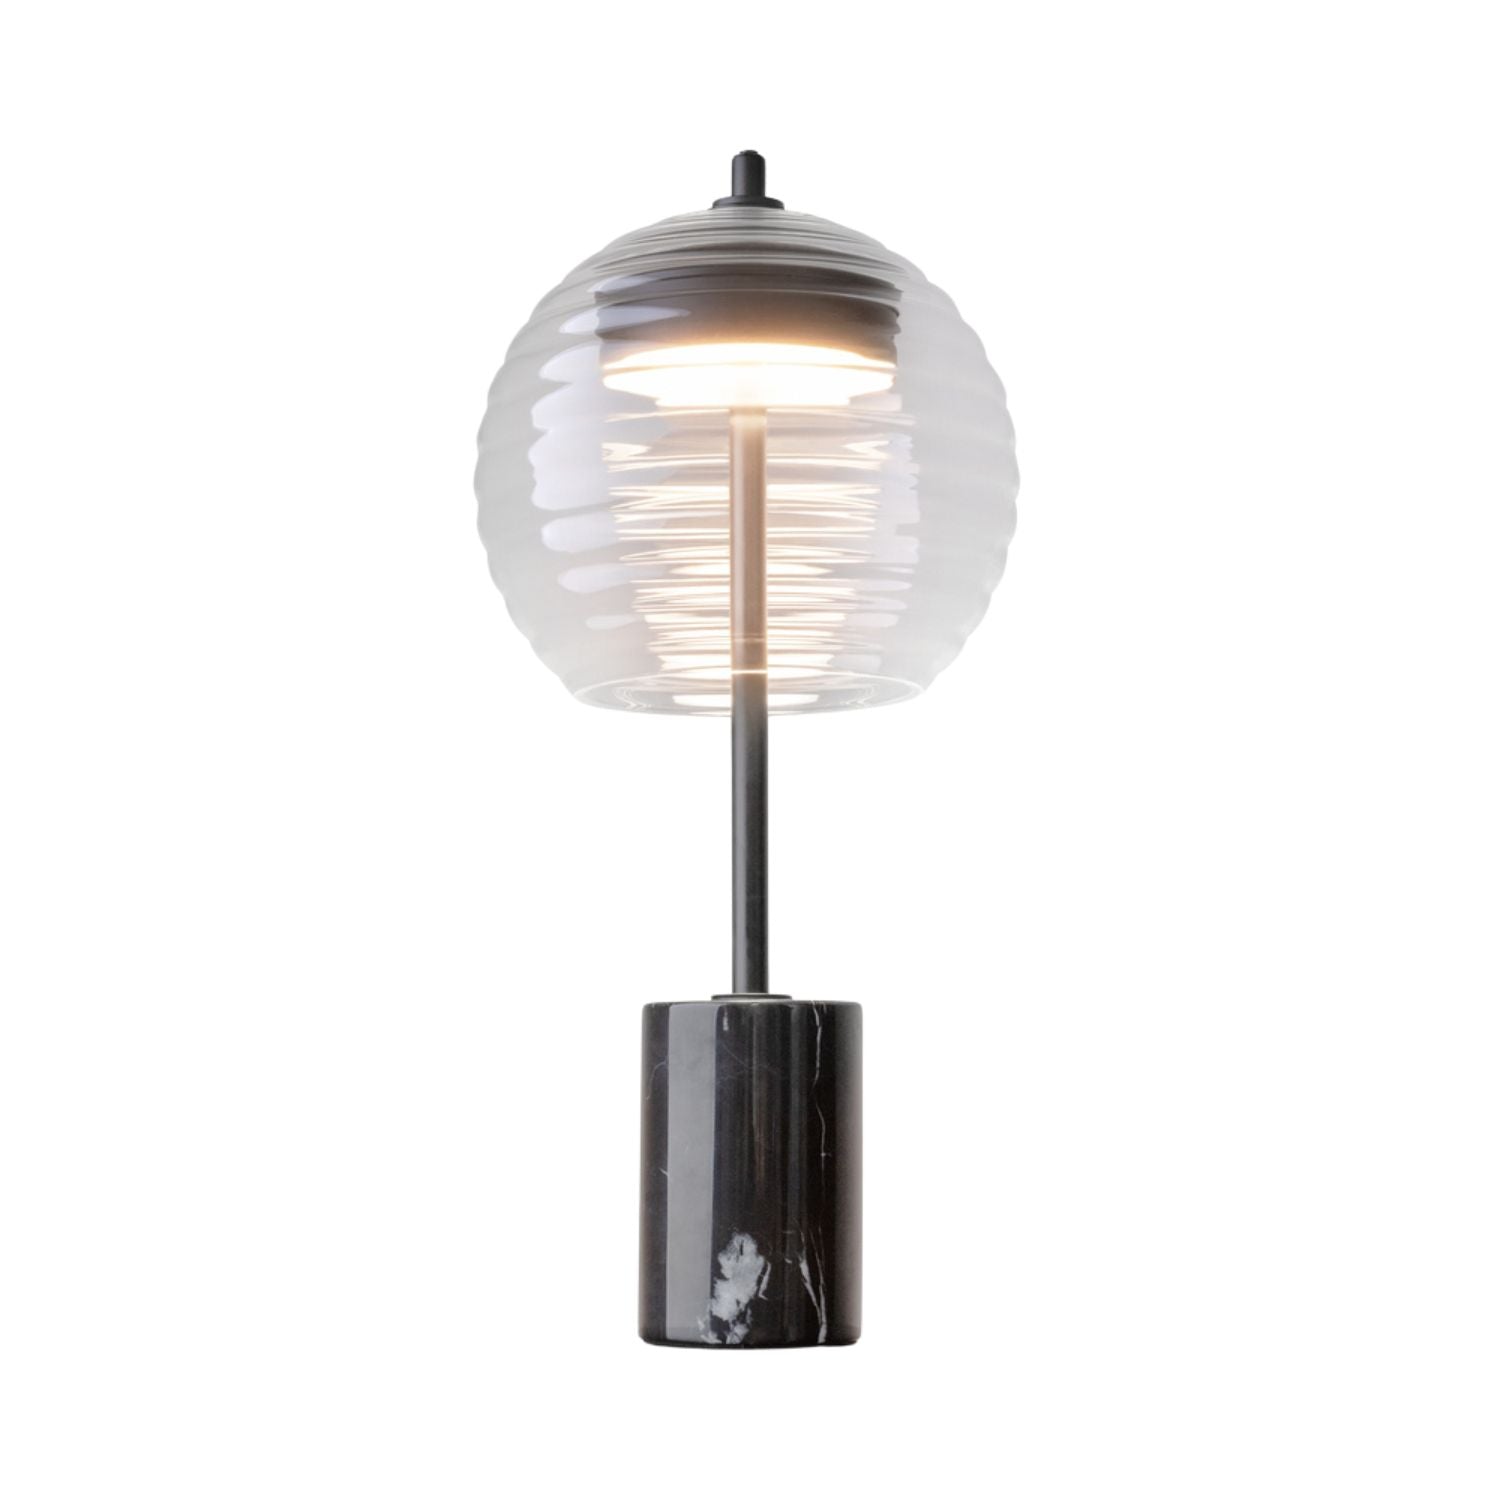 MYSTIC - Black marble and glass effect table lamp